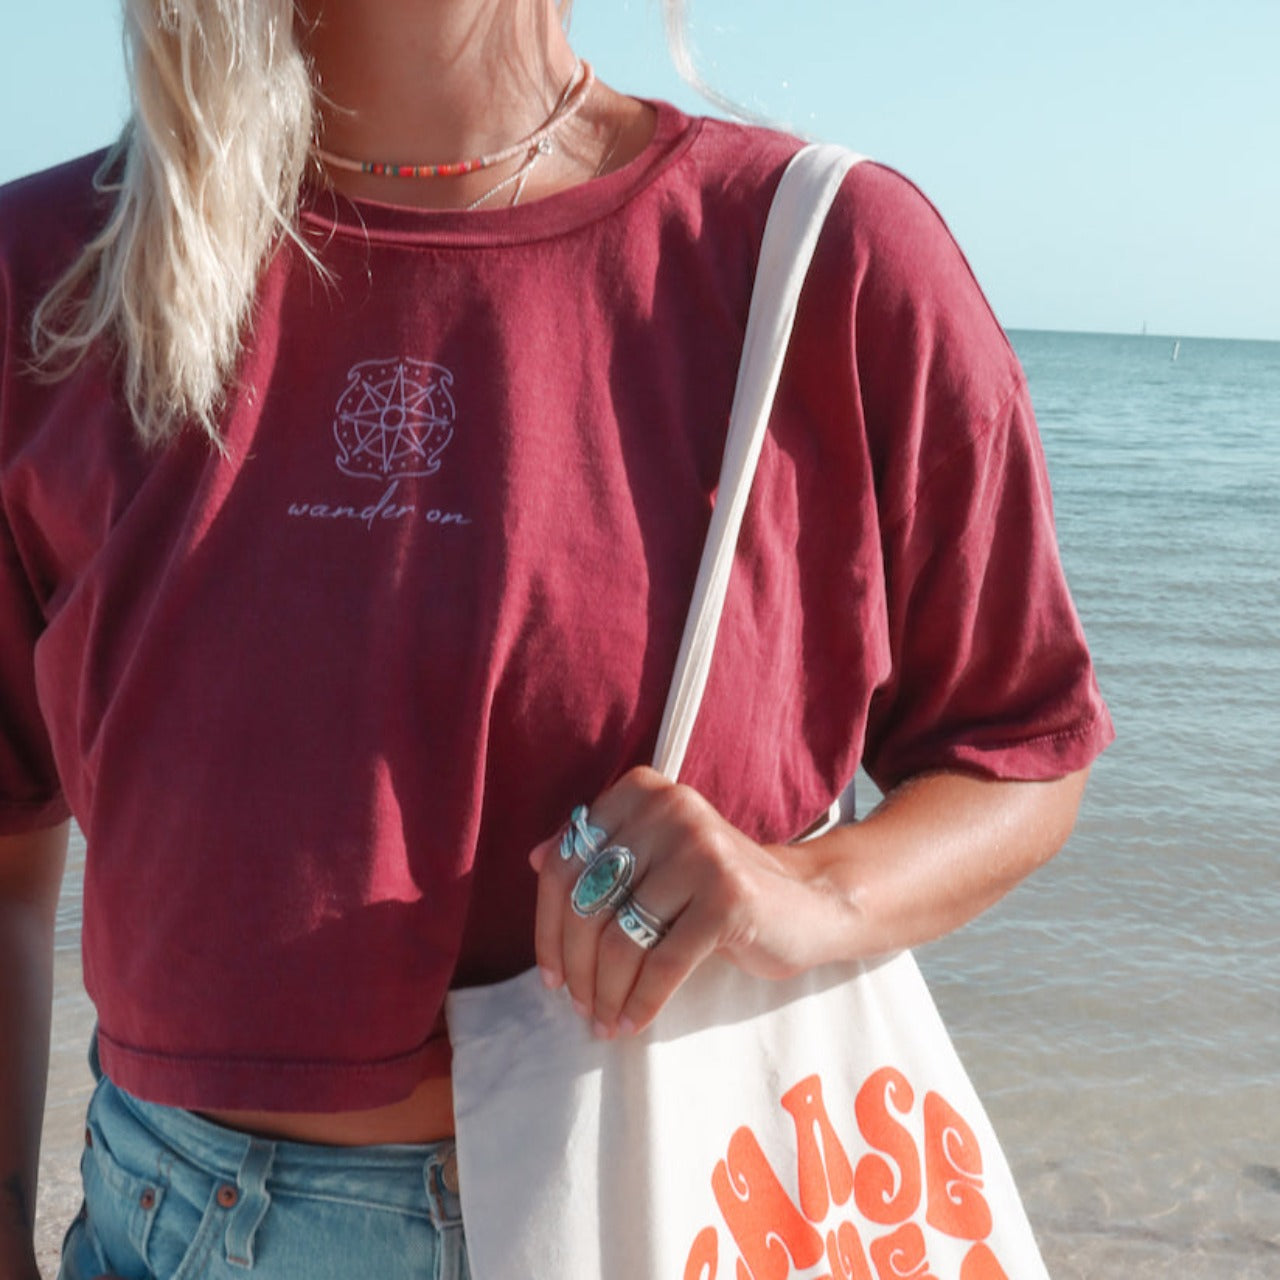 "Wander On Crop" by Wandering Waves Surf Company featuring "Chase the Sun tote" by Wandering Waves Surf Company